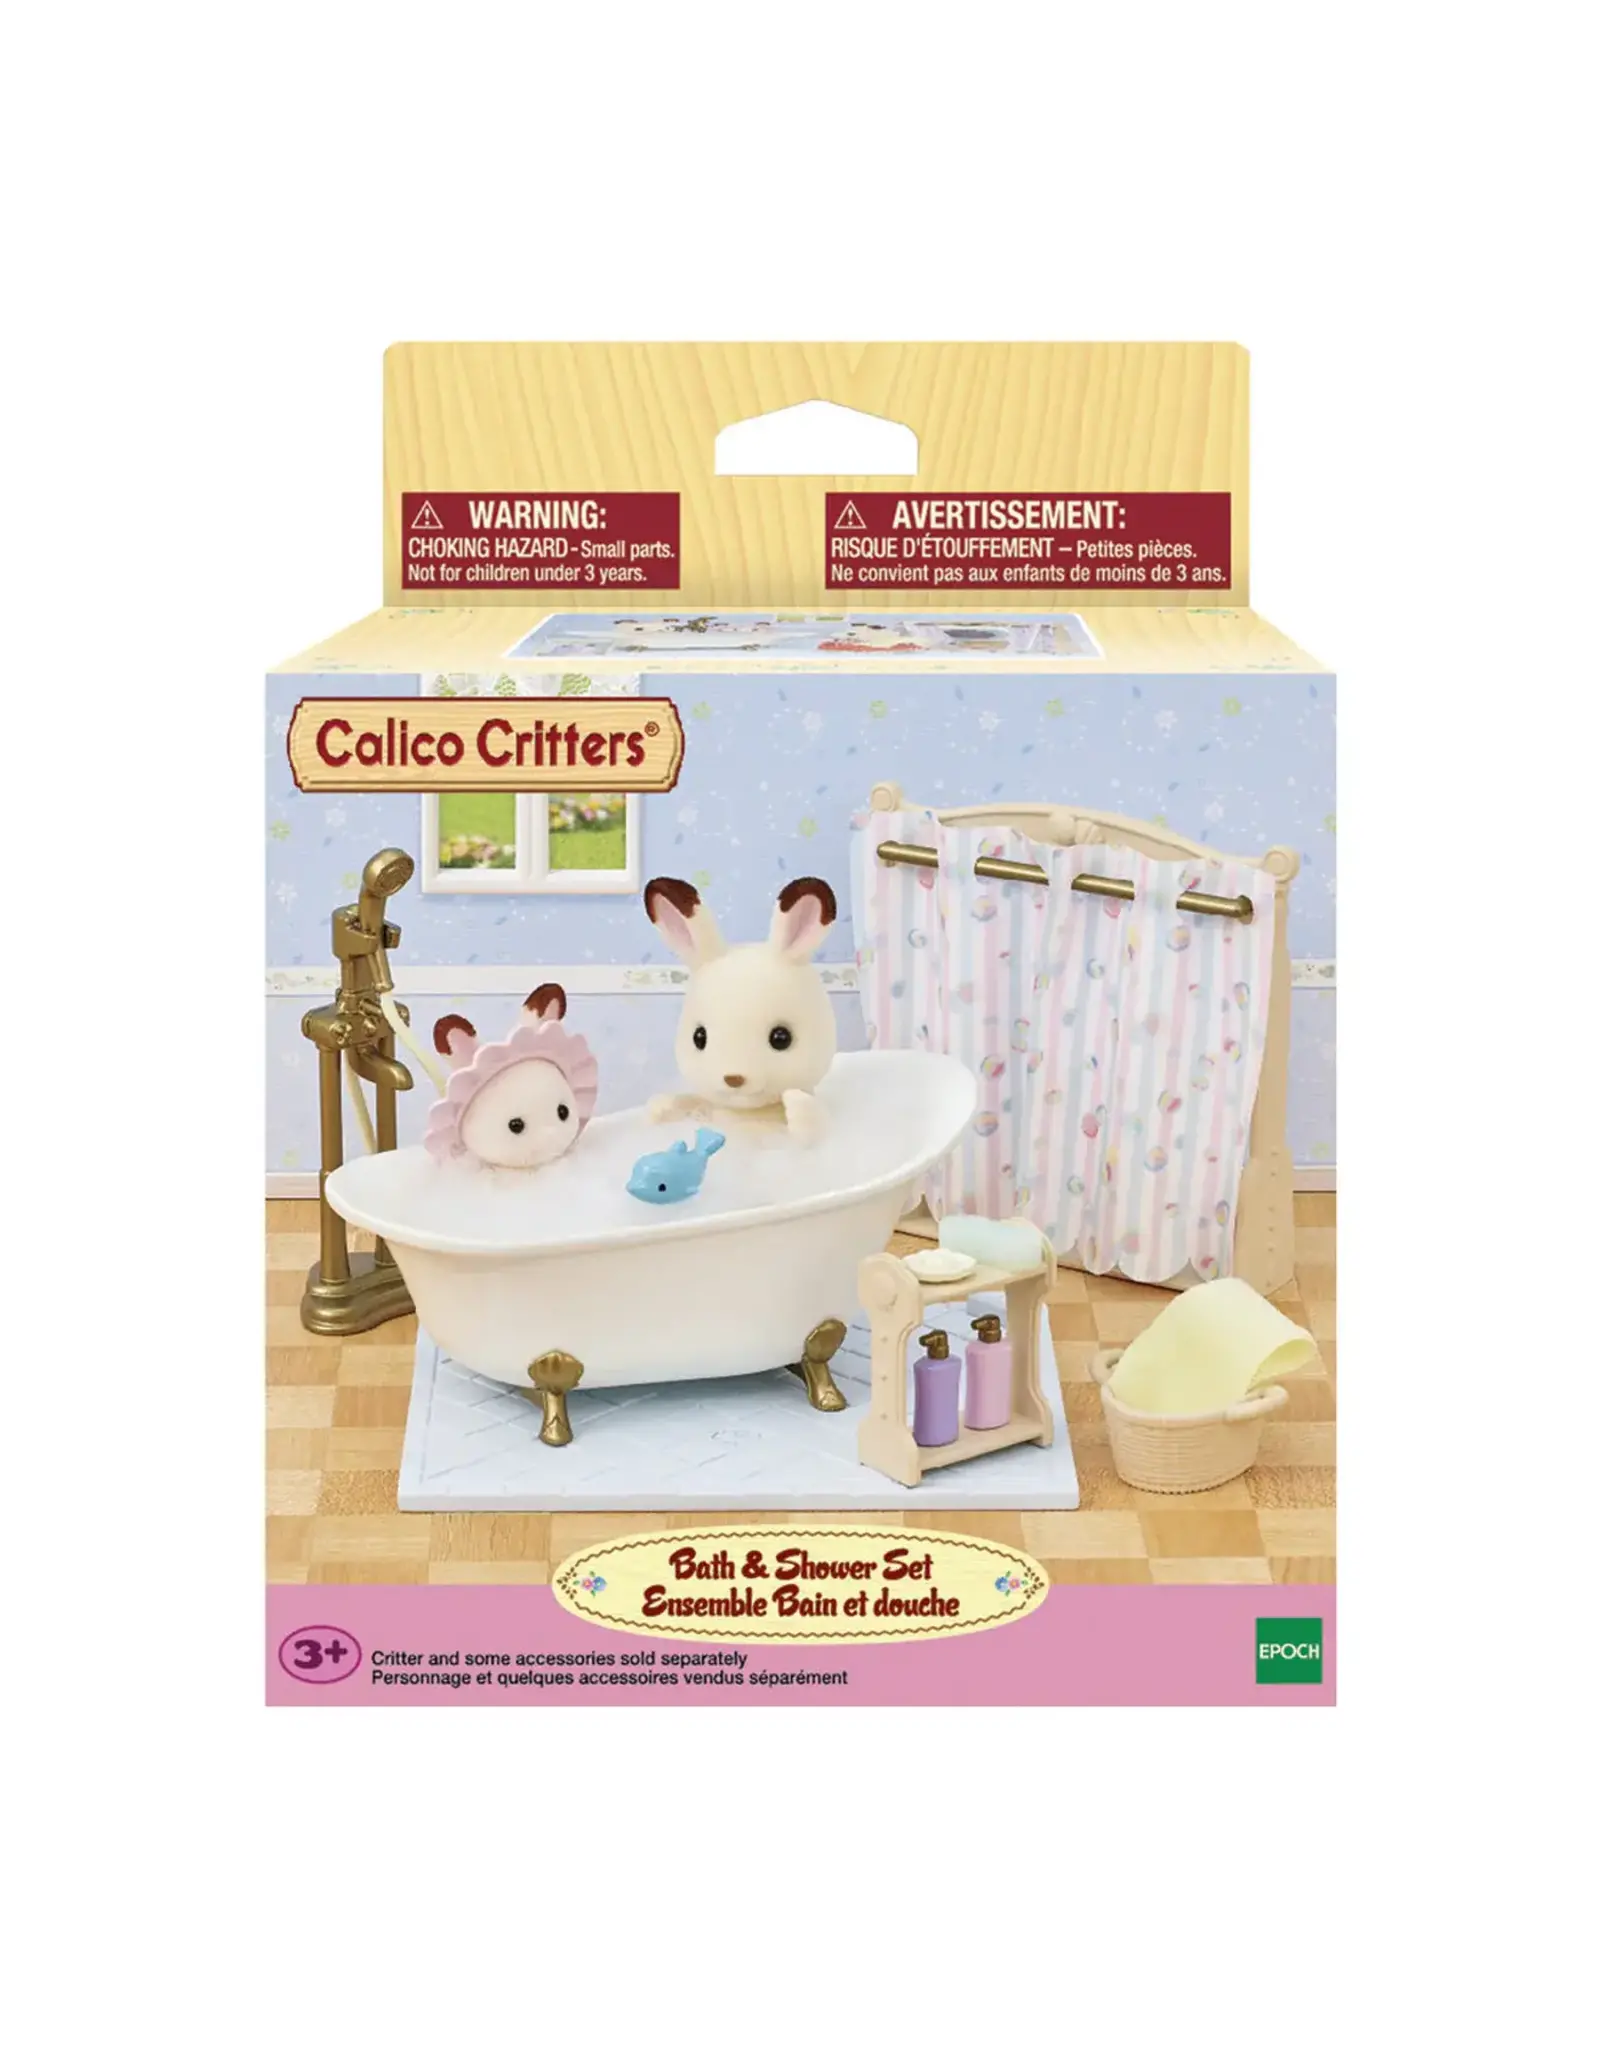 Calico Critters Calico Critters Bath & Shower Set